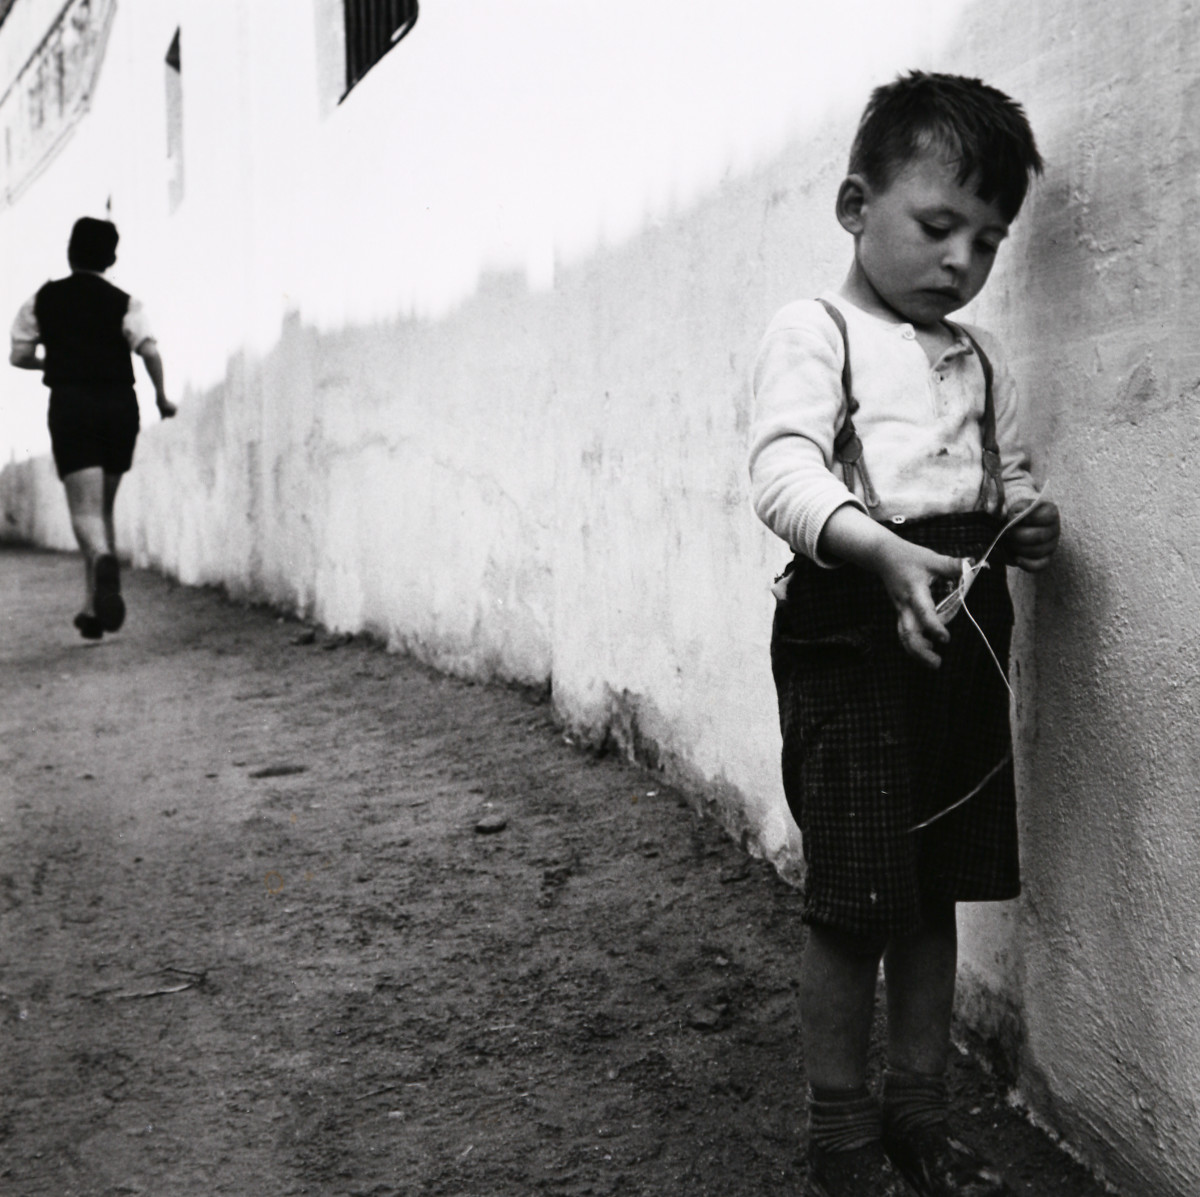 Seville, Spain by Edward R. Miller  Image: Two white children by a white wall, one in the background running away